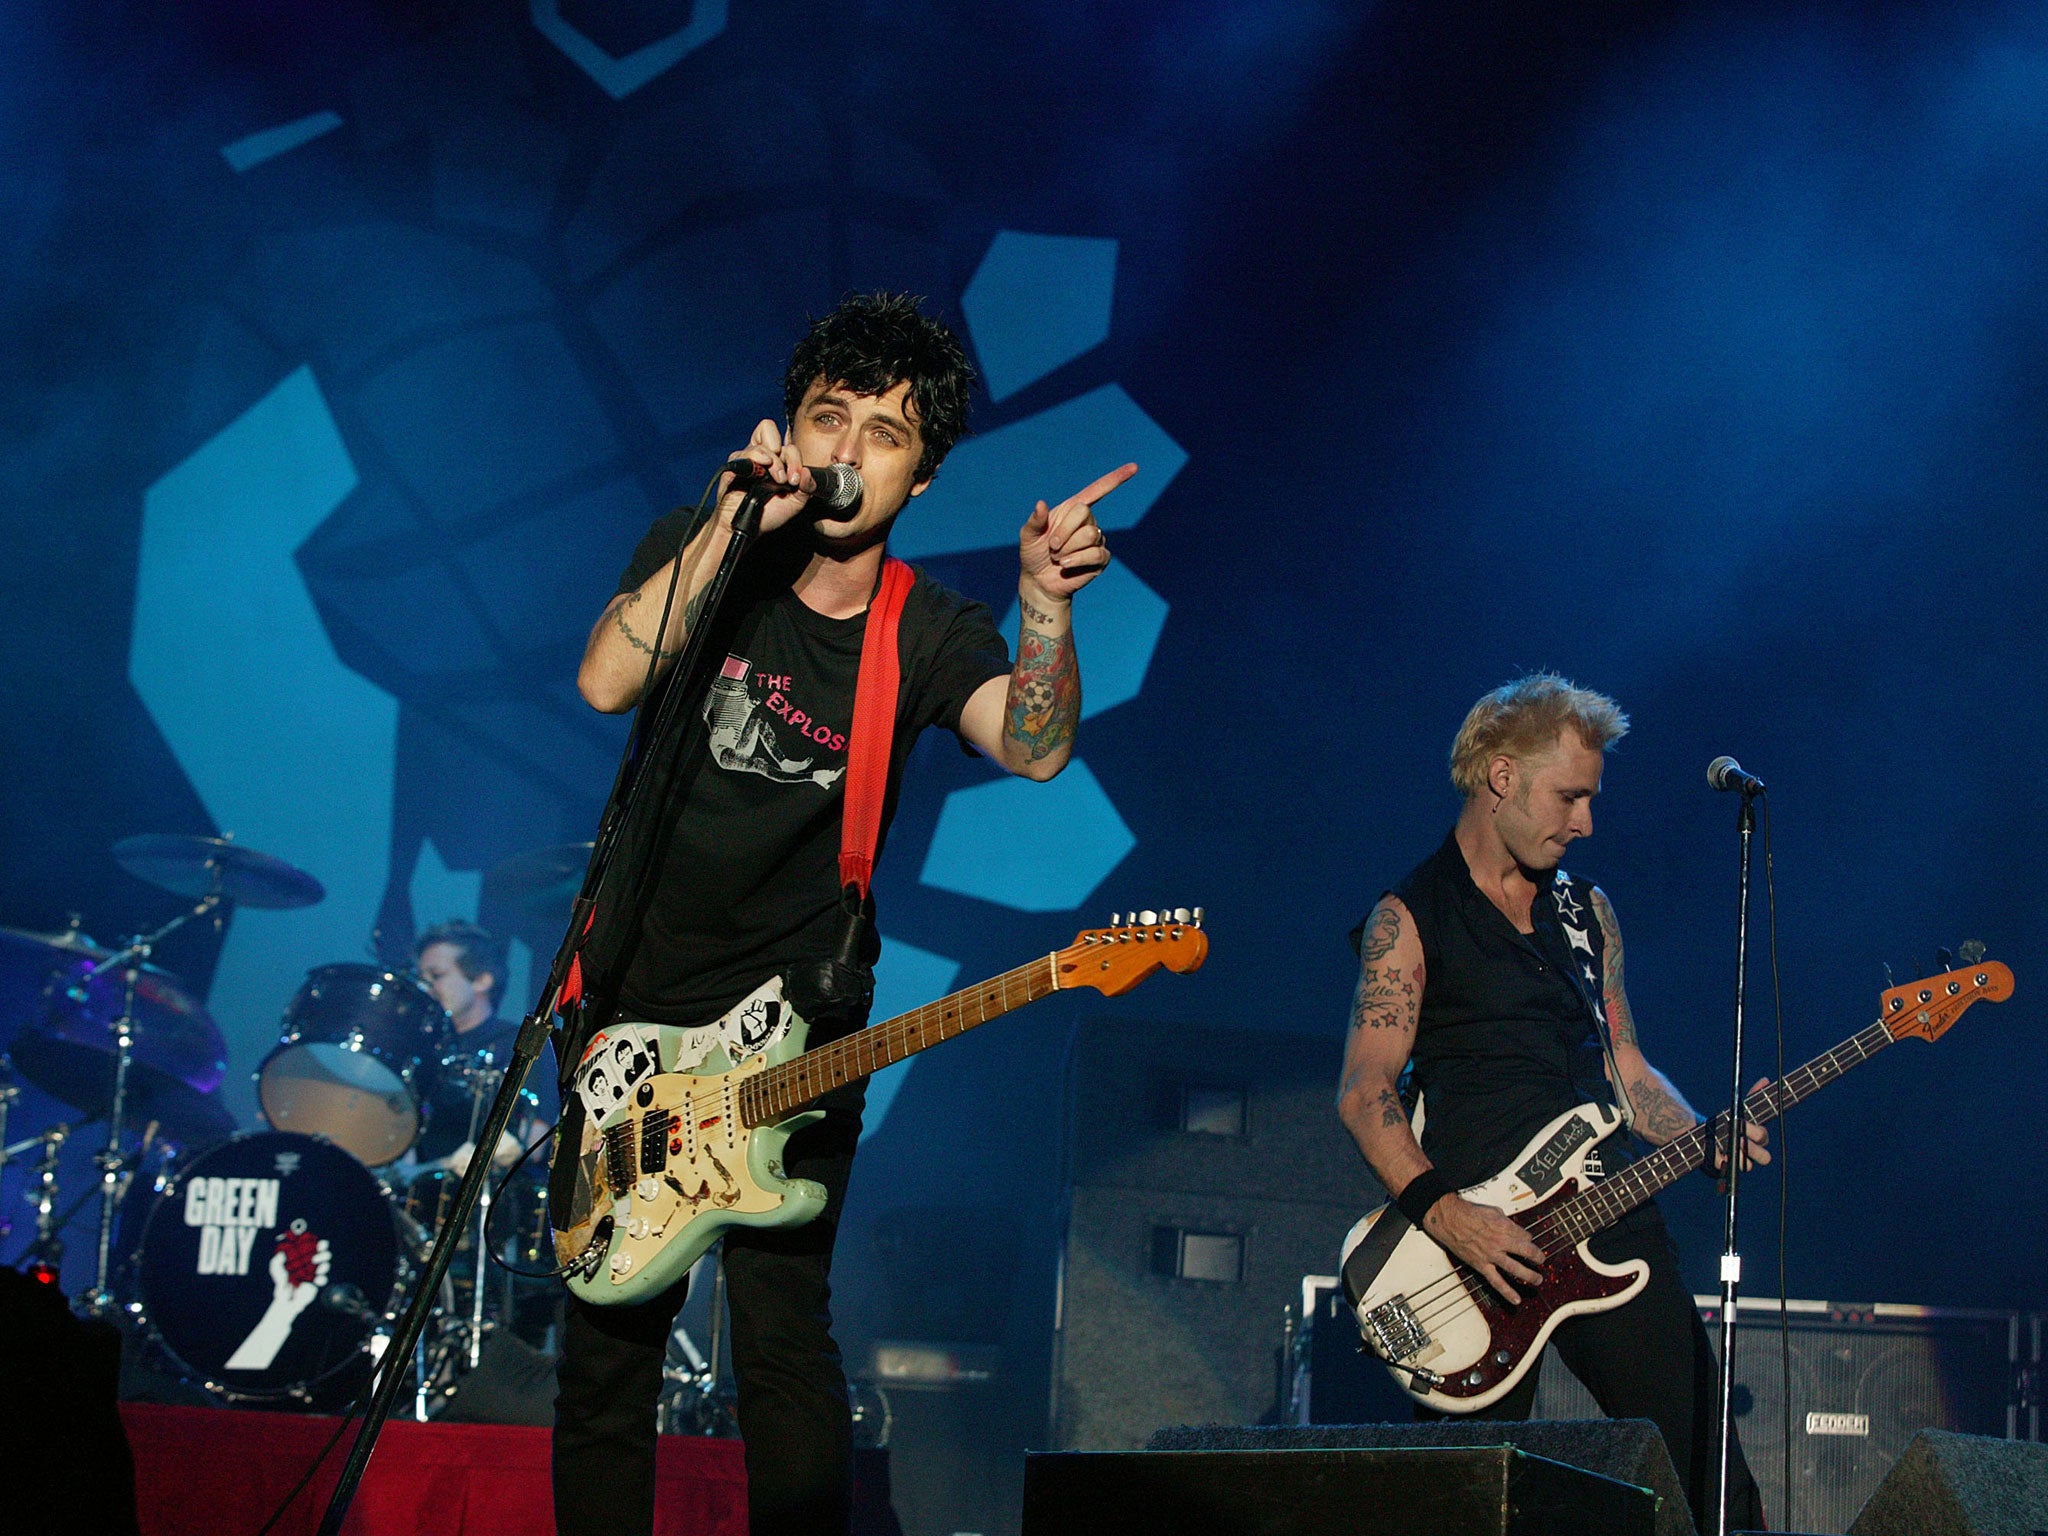 Green Day are one of the bands nominated